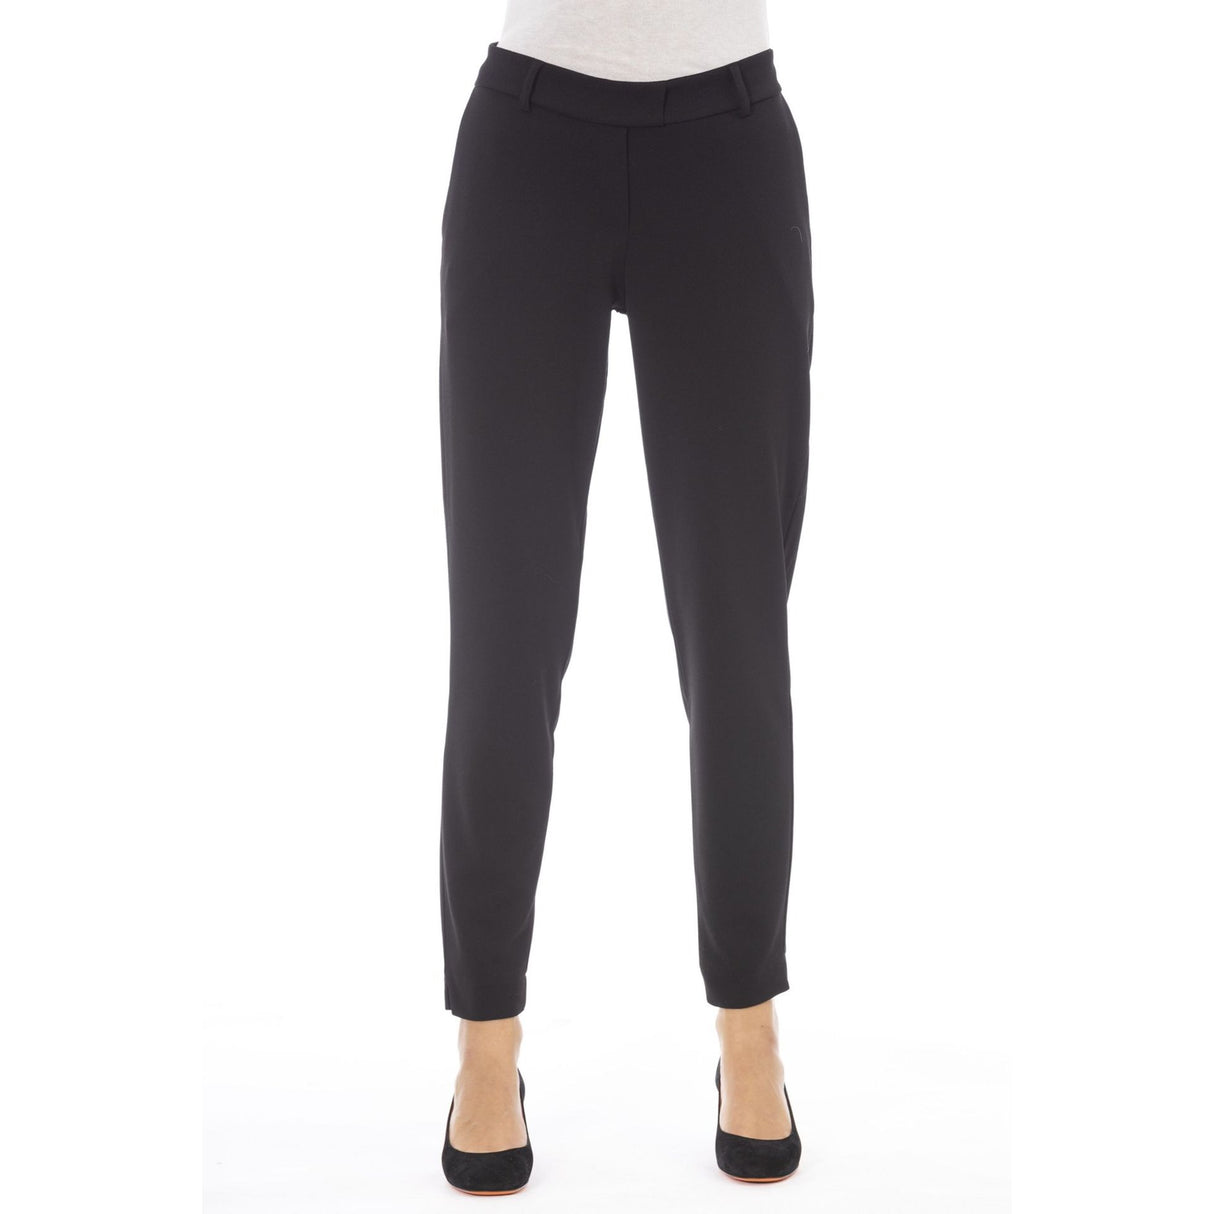 Women's trousers Fall/Winter trousers Italian-made trousers Comfortable trousers Stylish trousers Versatile trousers Work trousers (depending on the fit) Dressy casual trousers Ponte pants